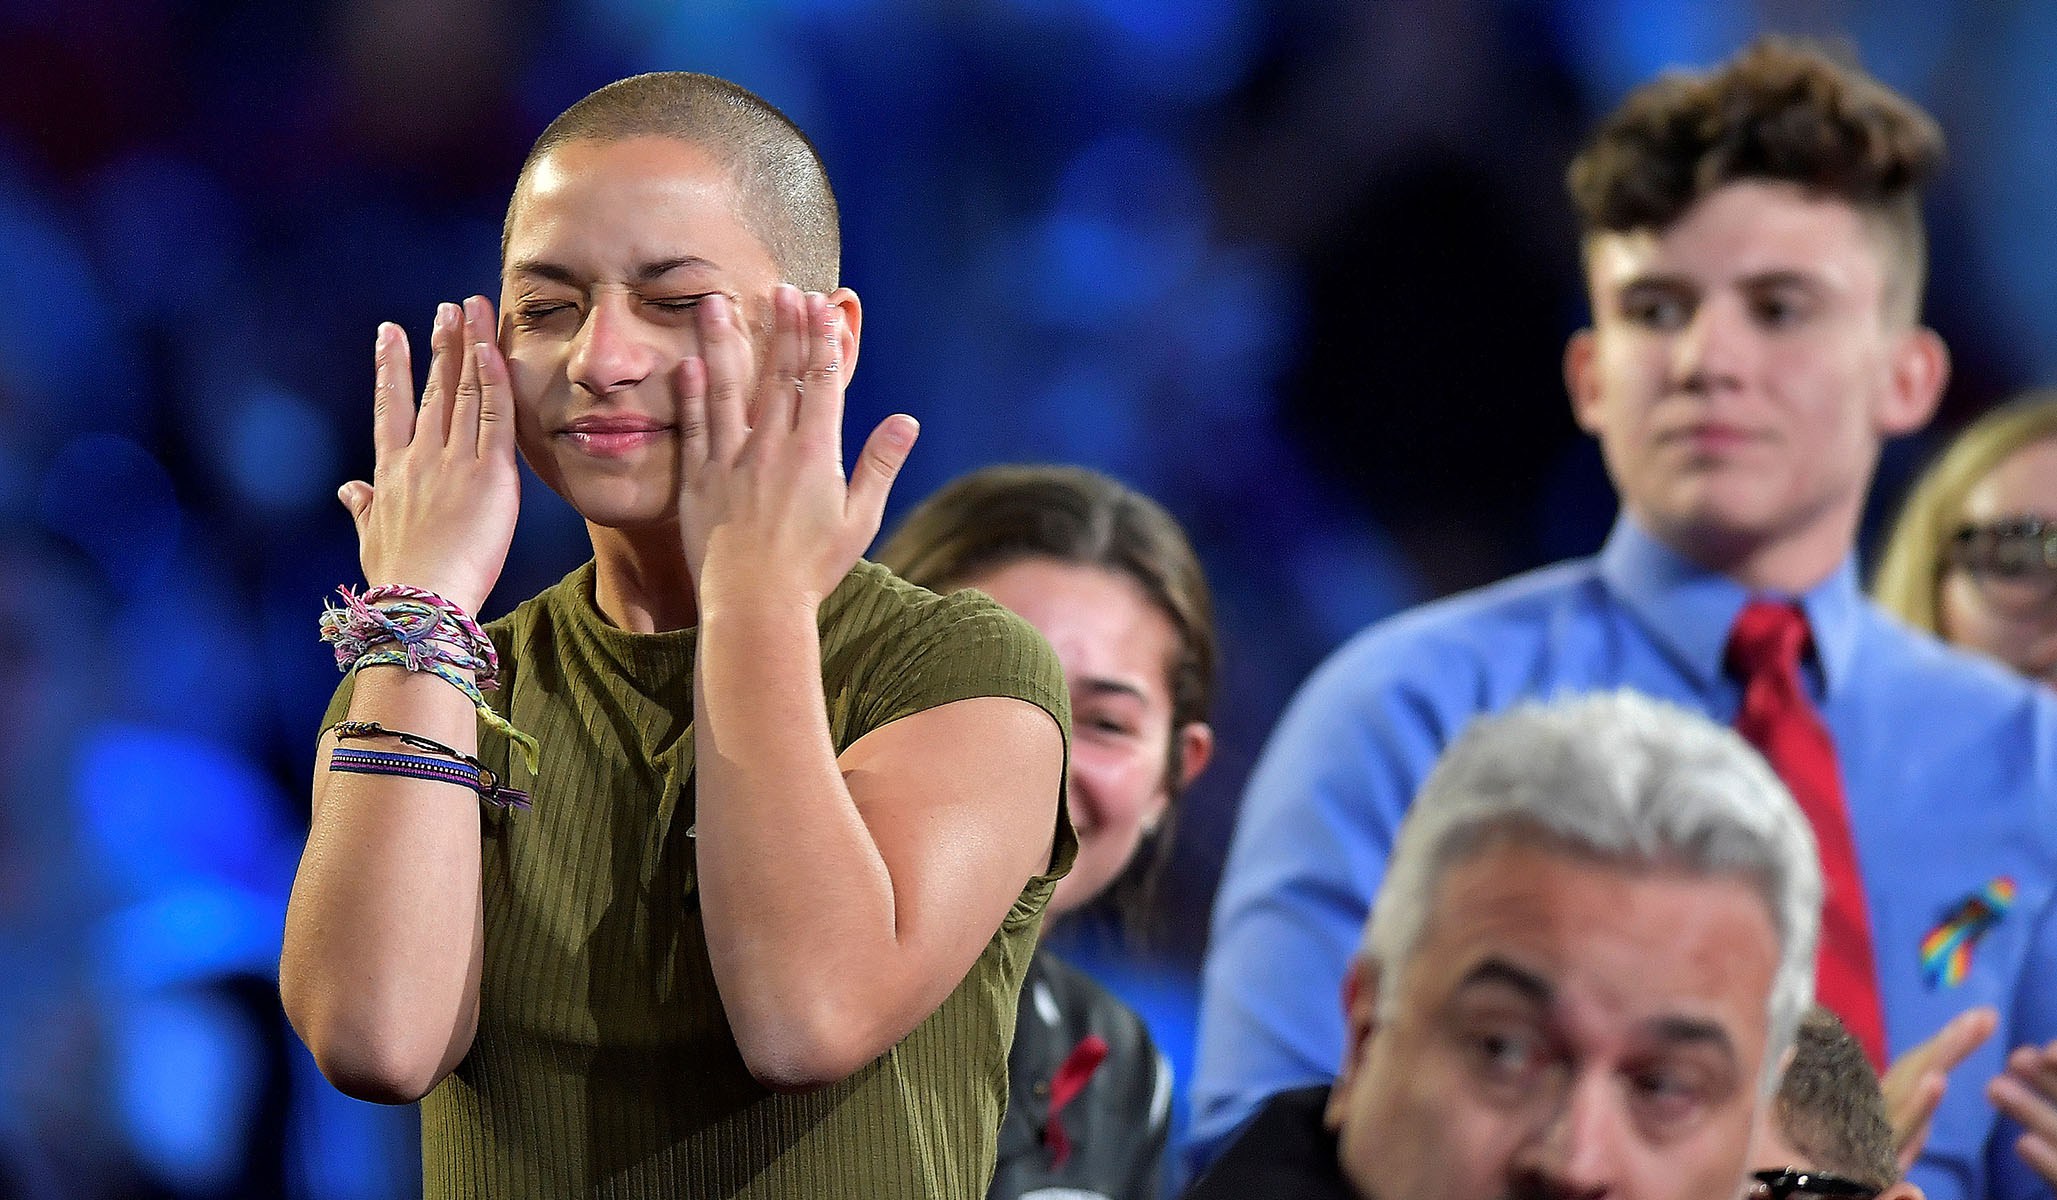 Marjory Stoneman Douglas High School student Emma Gonzalez wipes away tears during a CNN town hall meeting, at the BB&T Center, in Sunrise